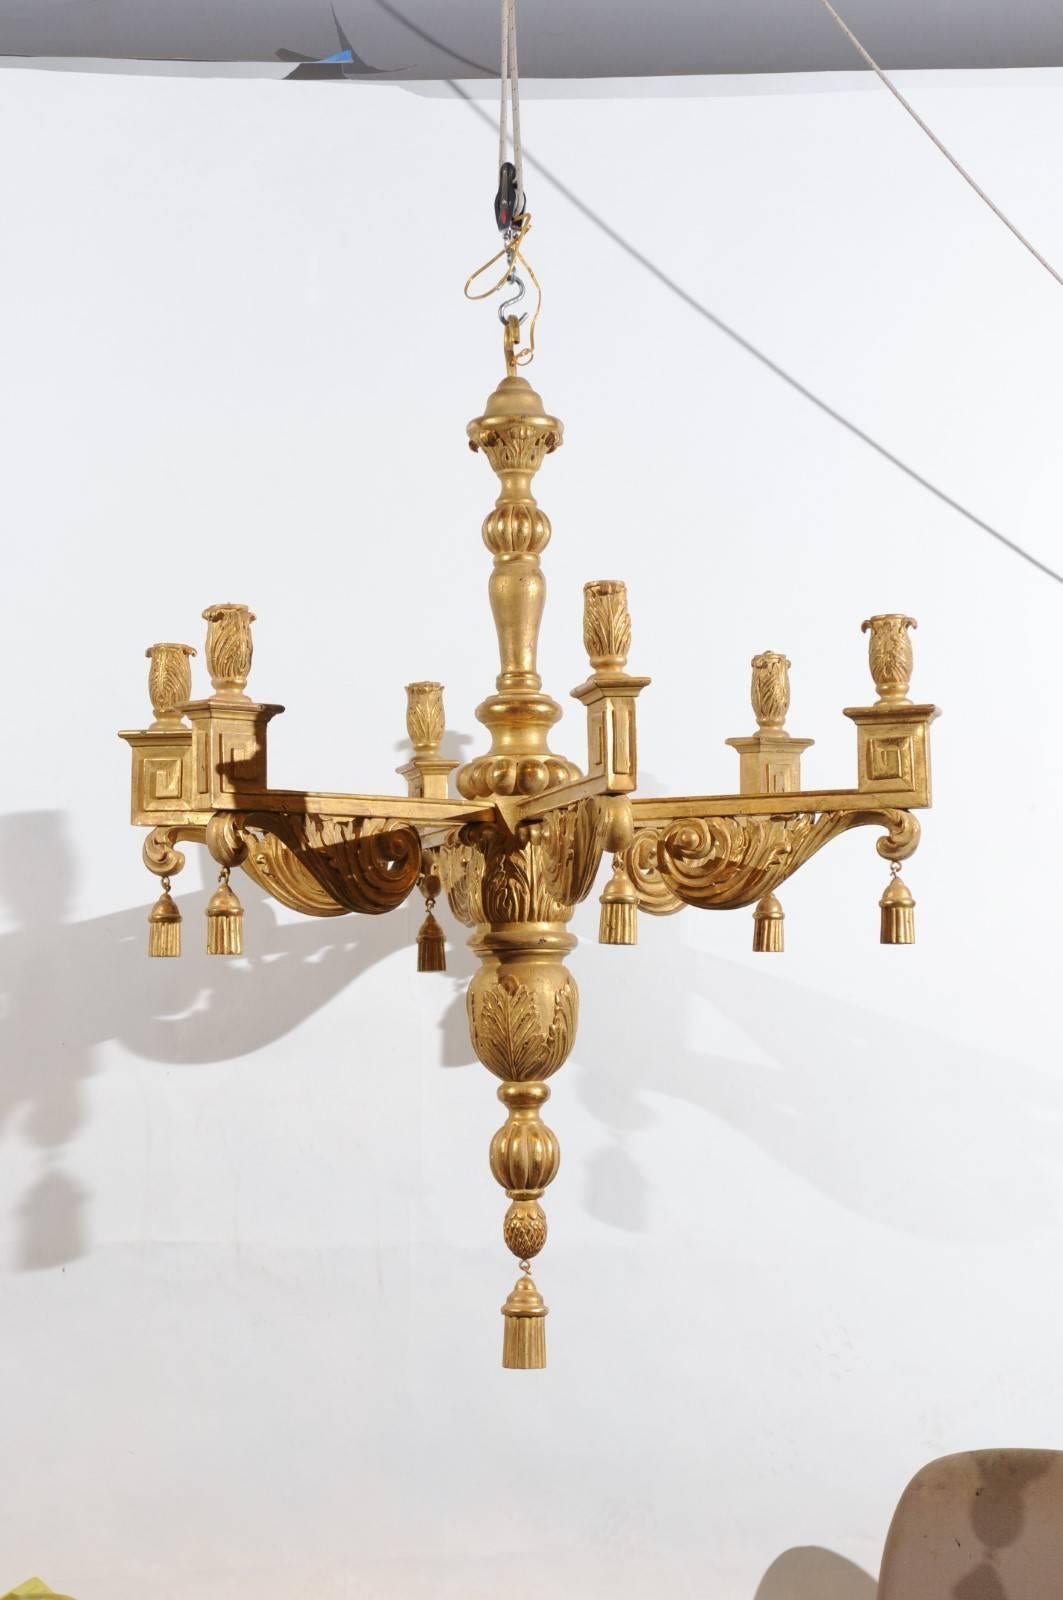 20th Century Large Giltwood Neoclassical Chandelier with Tassels & 6 Lights For Sale